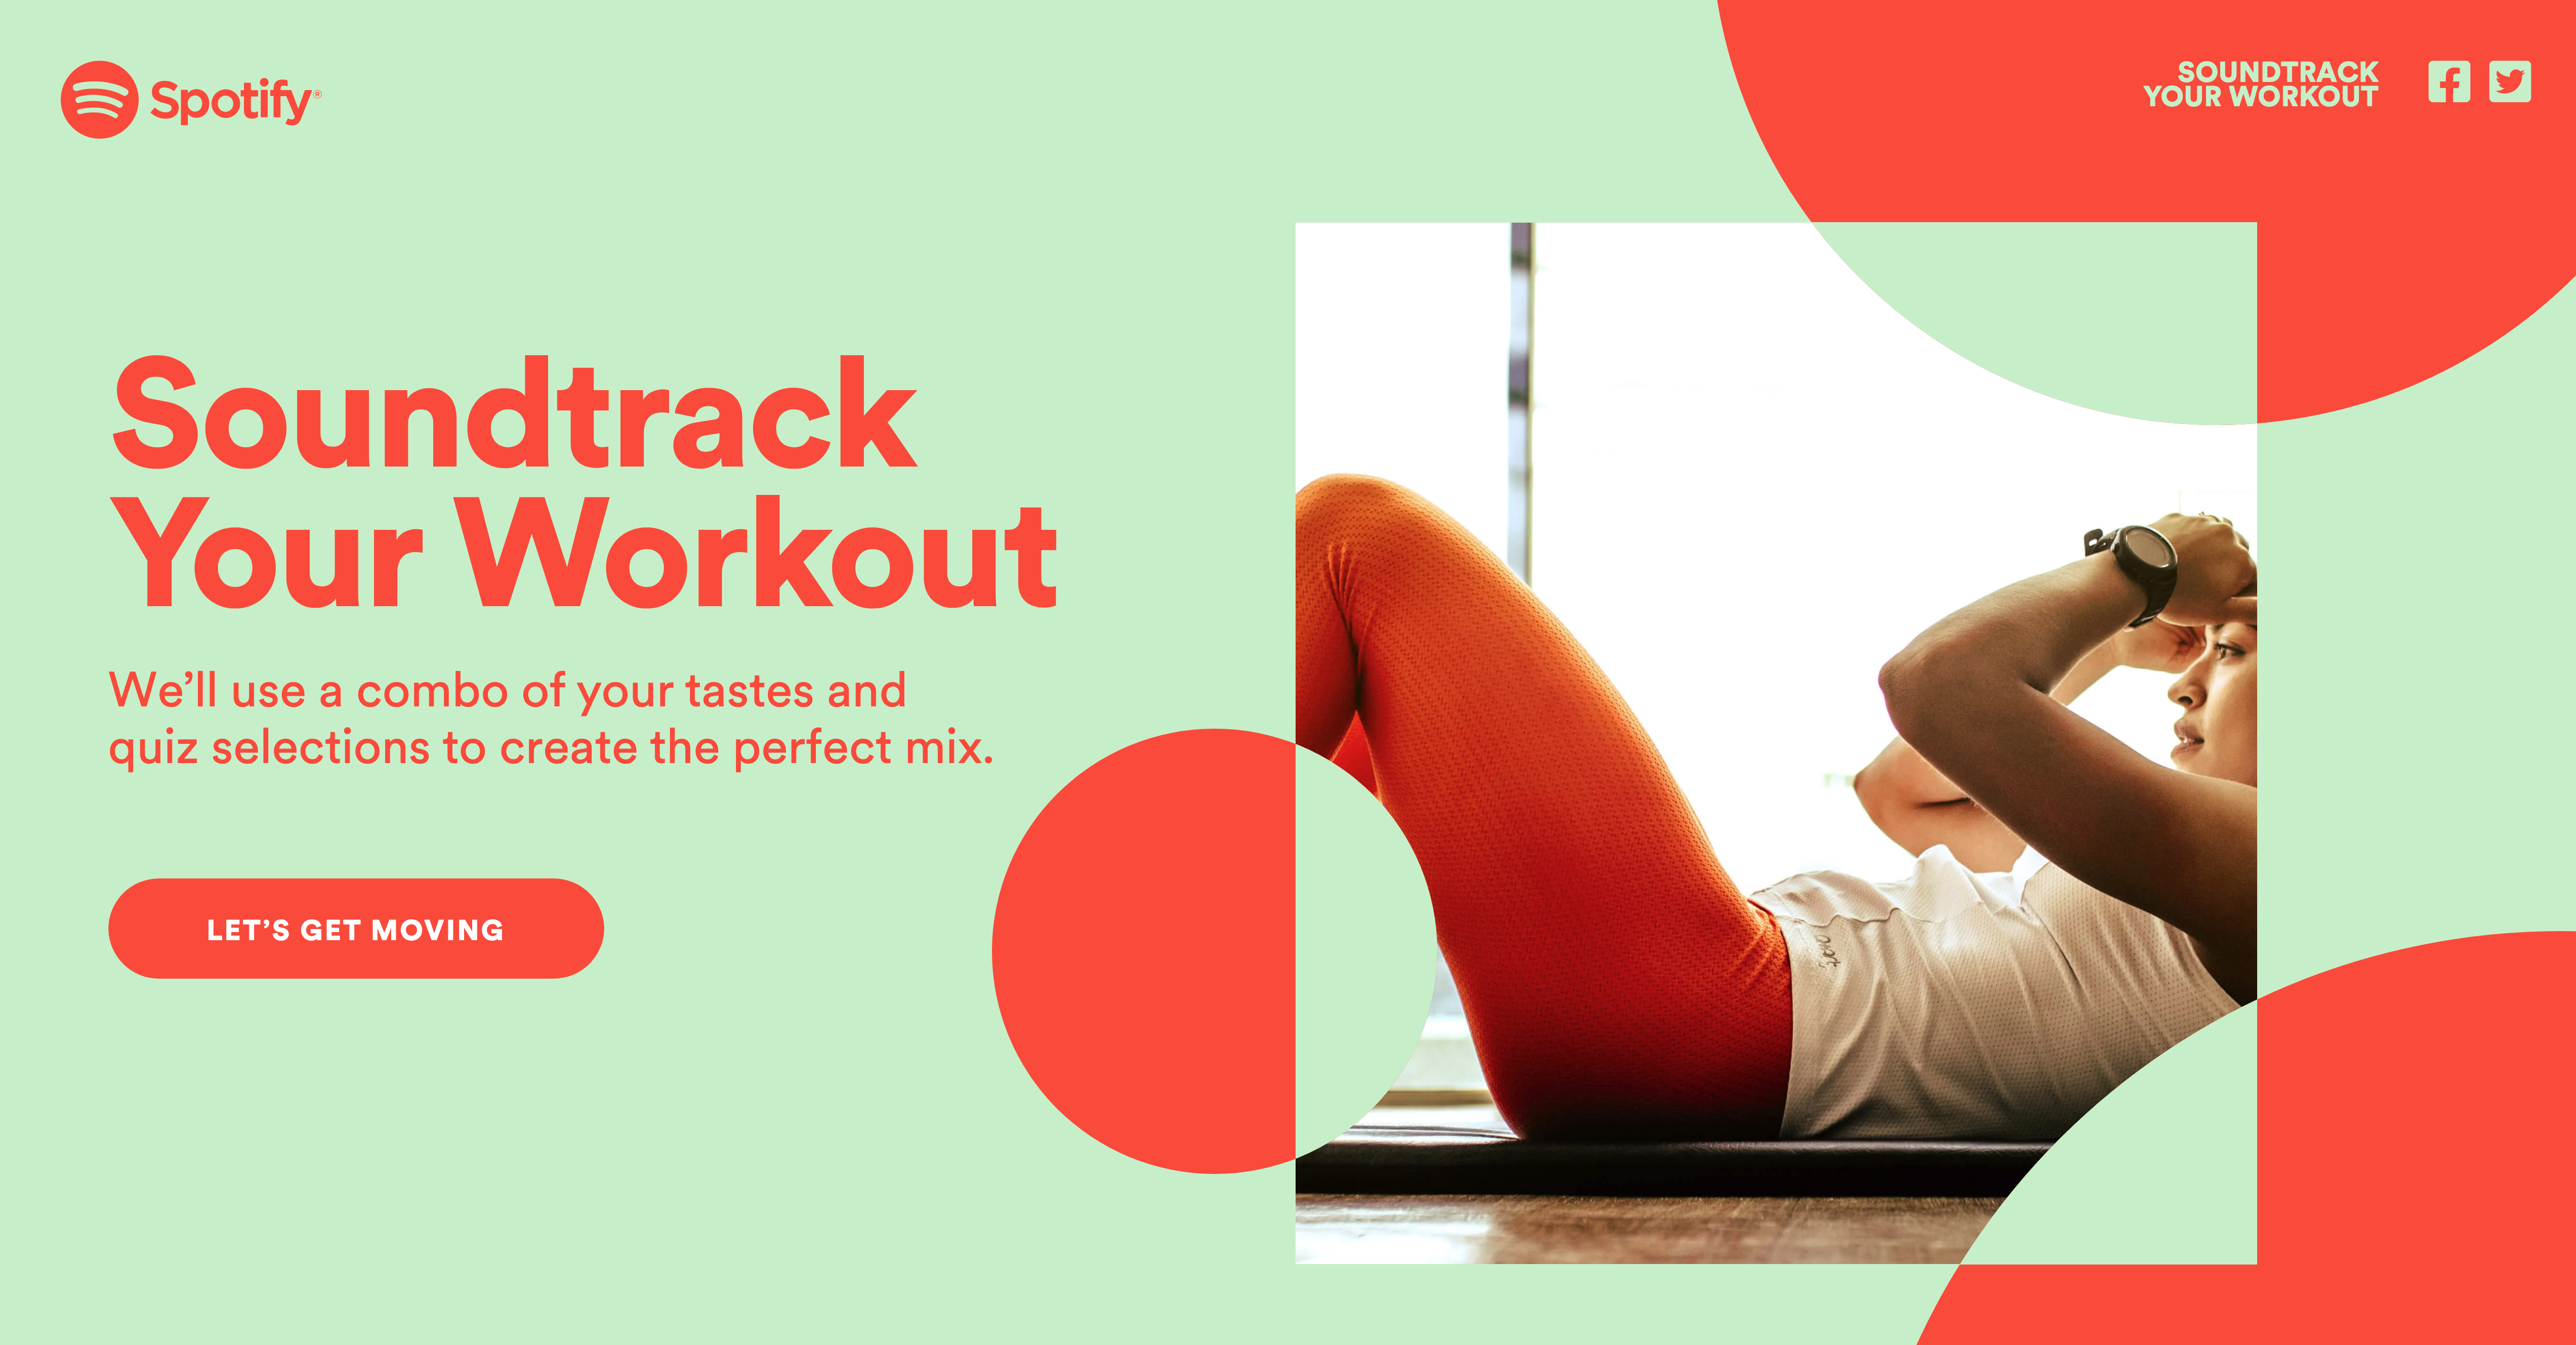 Spotify’s Workout tool creates a personalized playlist to your taste